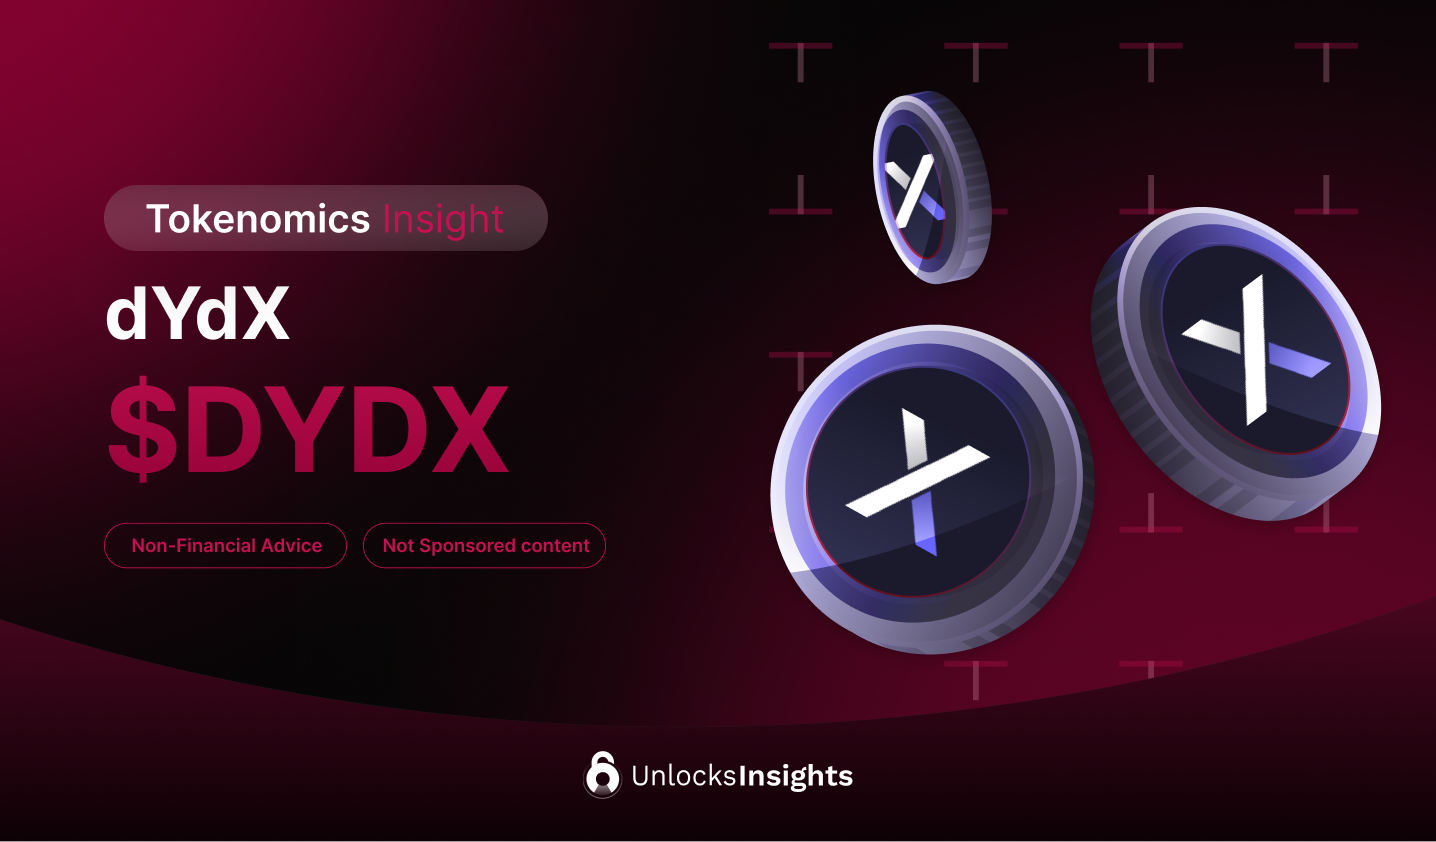 dYdX: Trading Strategies, Perpetual Contracts, and Tokenomics Insights